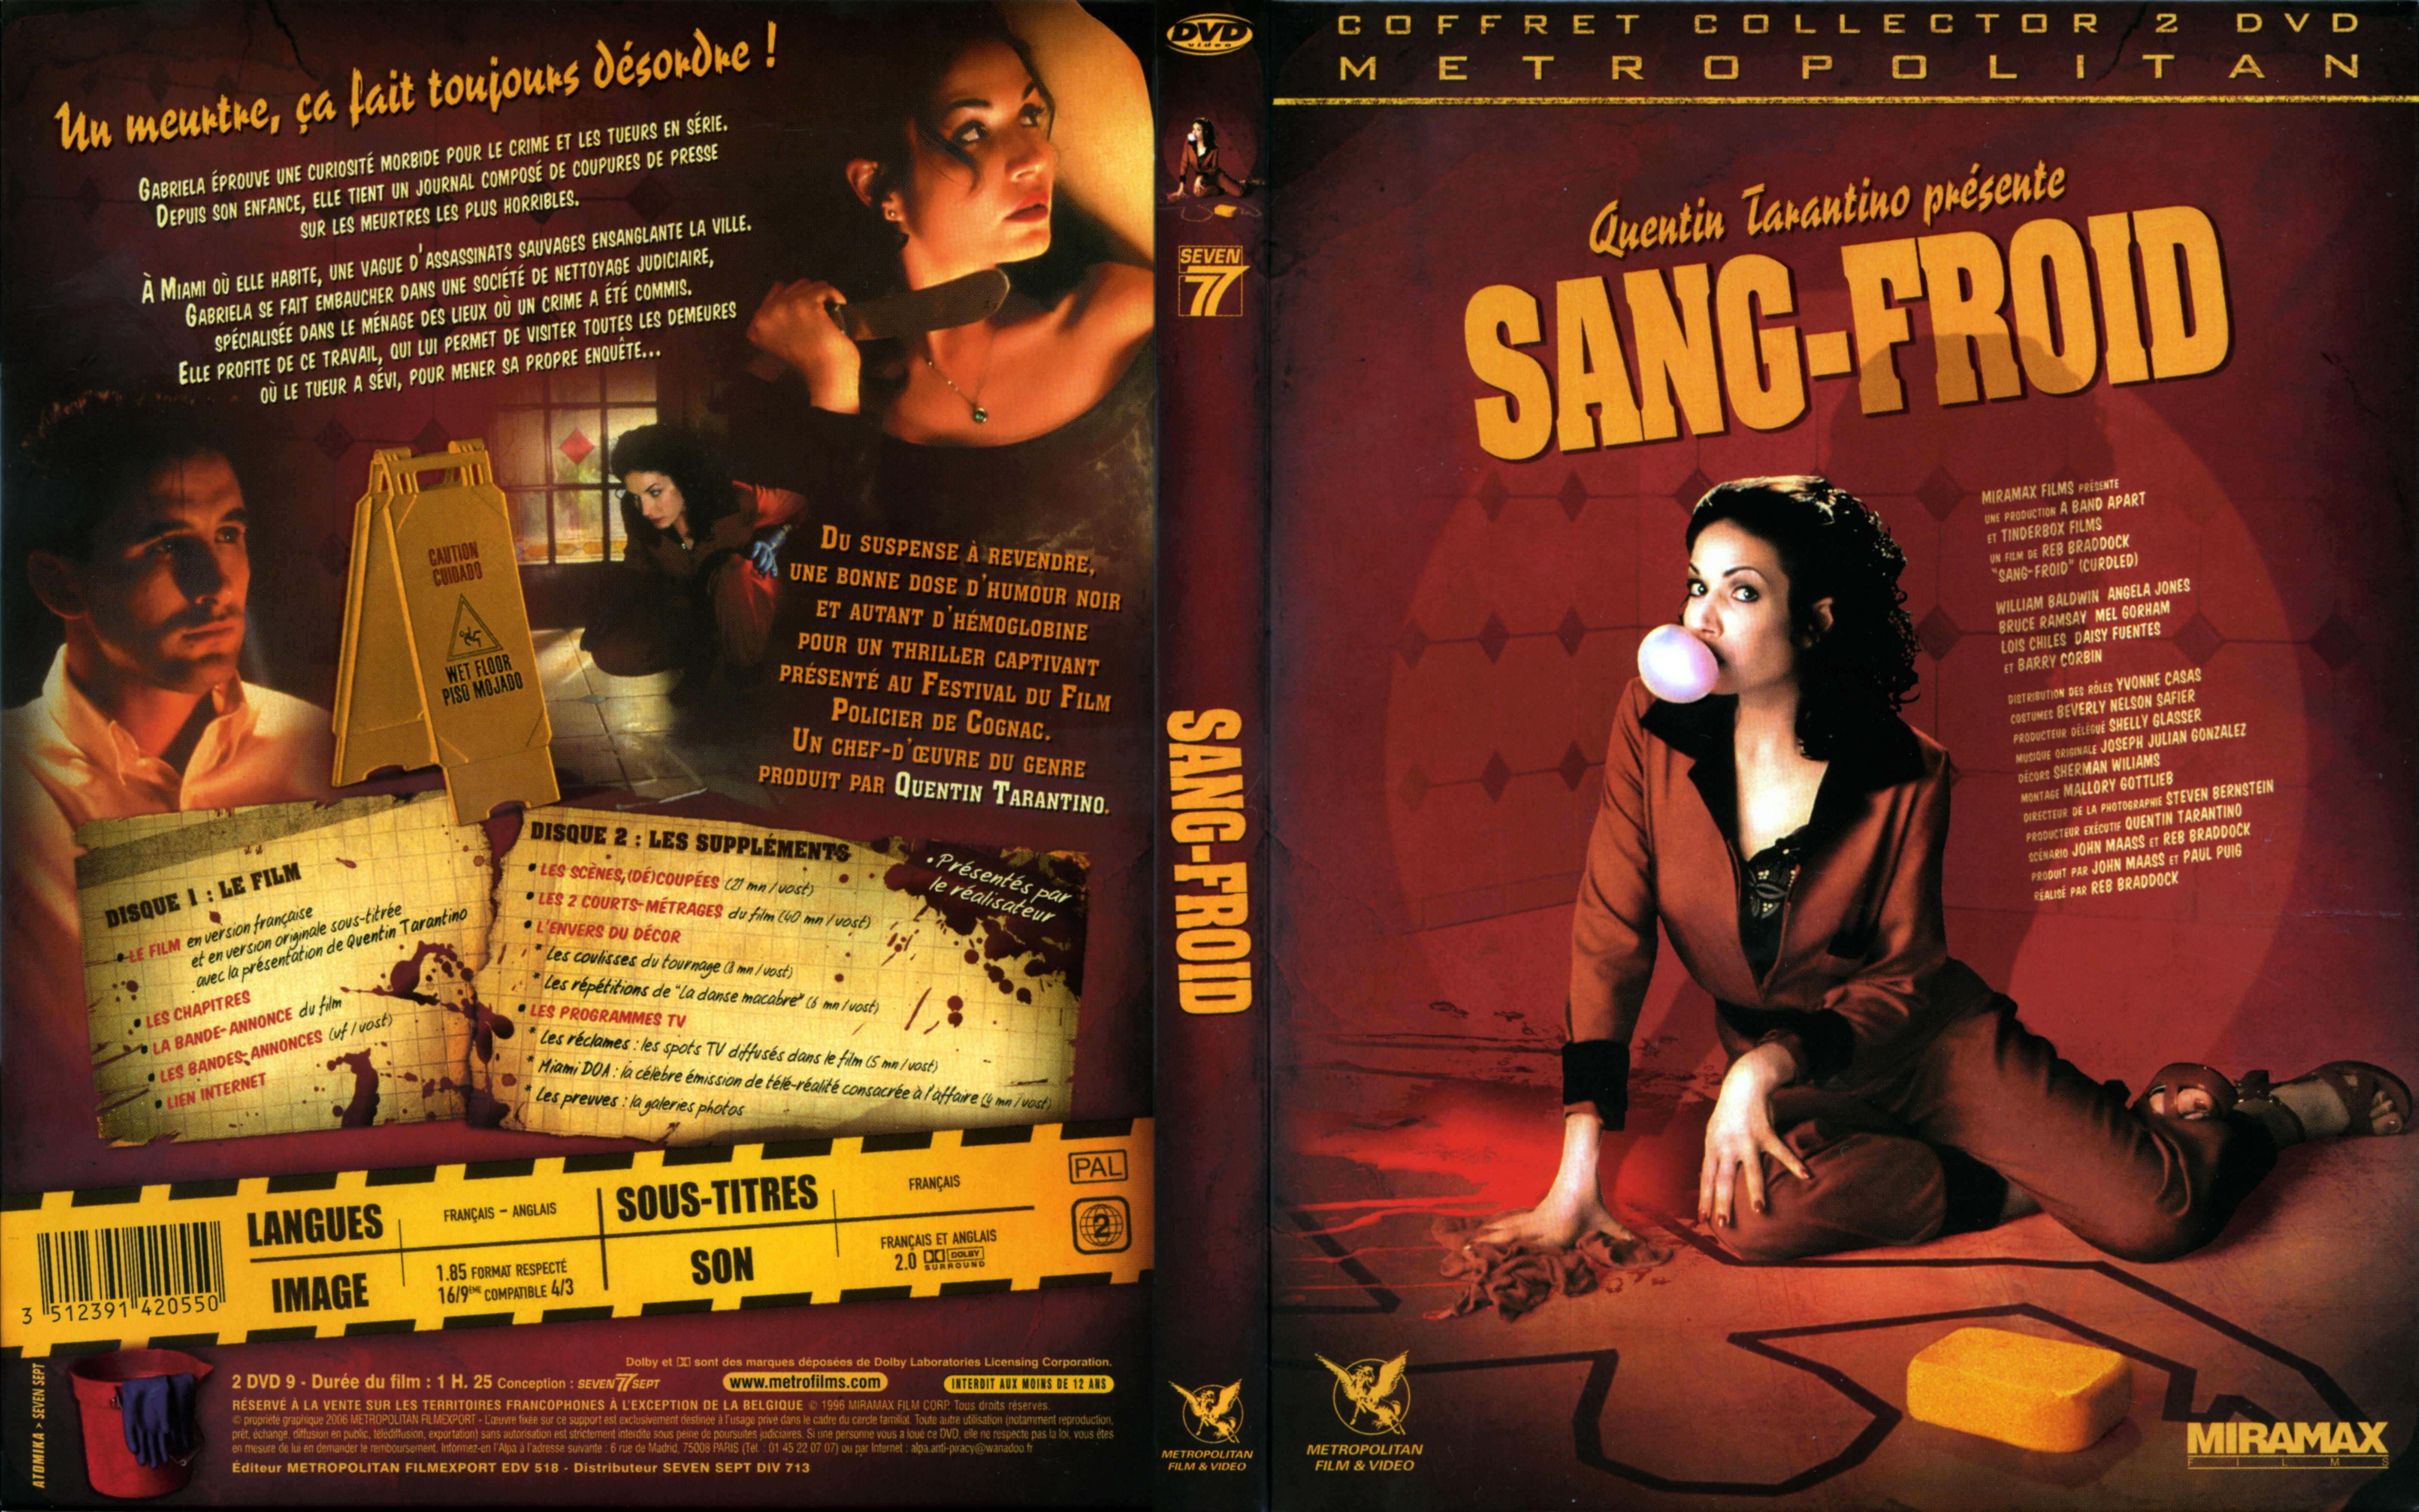 Jaquette DVD Sang-froid